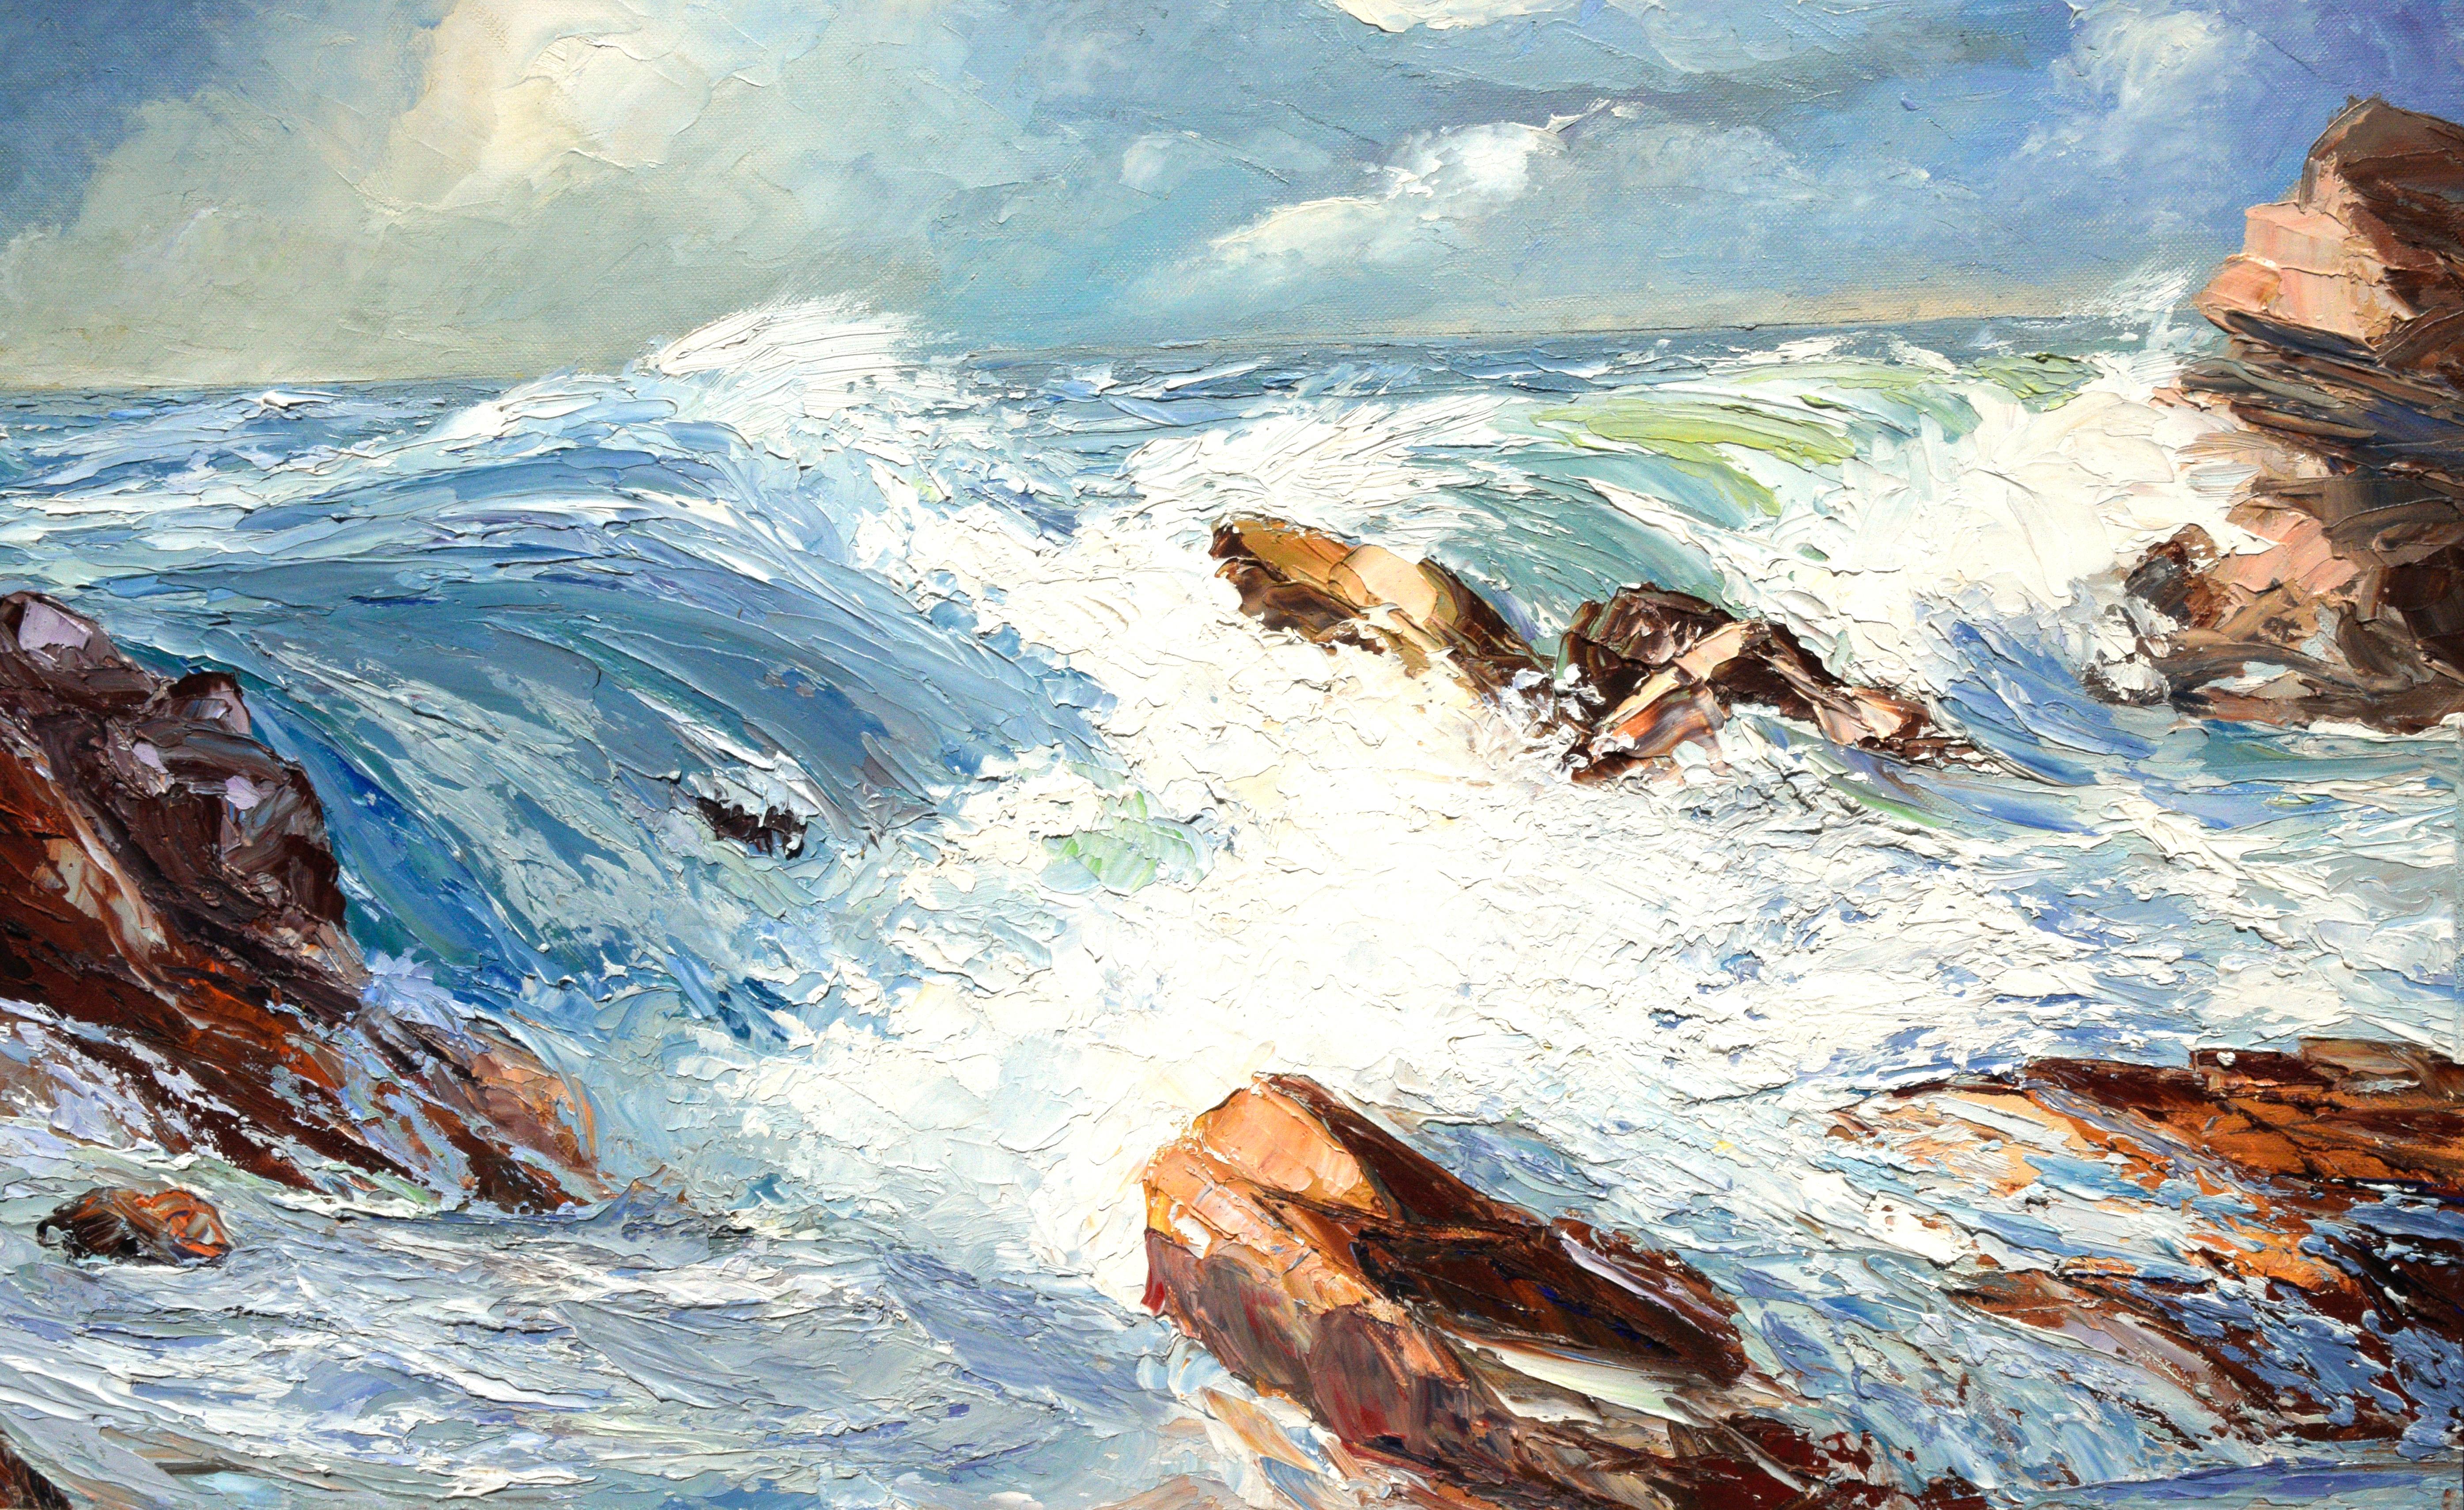 California Ocean Scene Seascape - Brown Landscape Painting by R.G. Hathcock